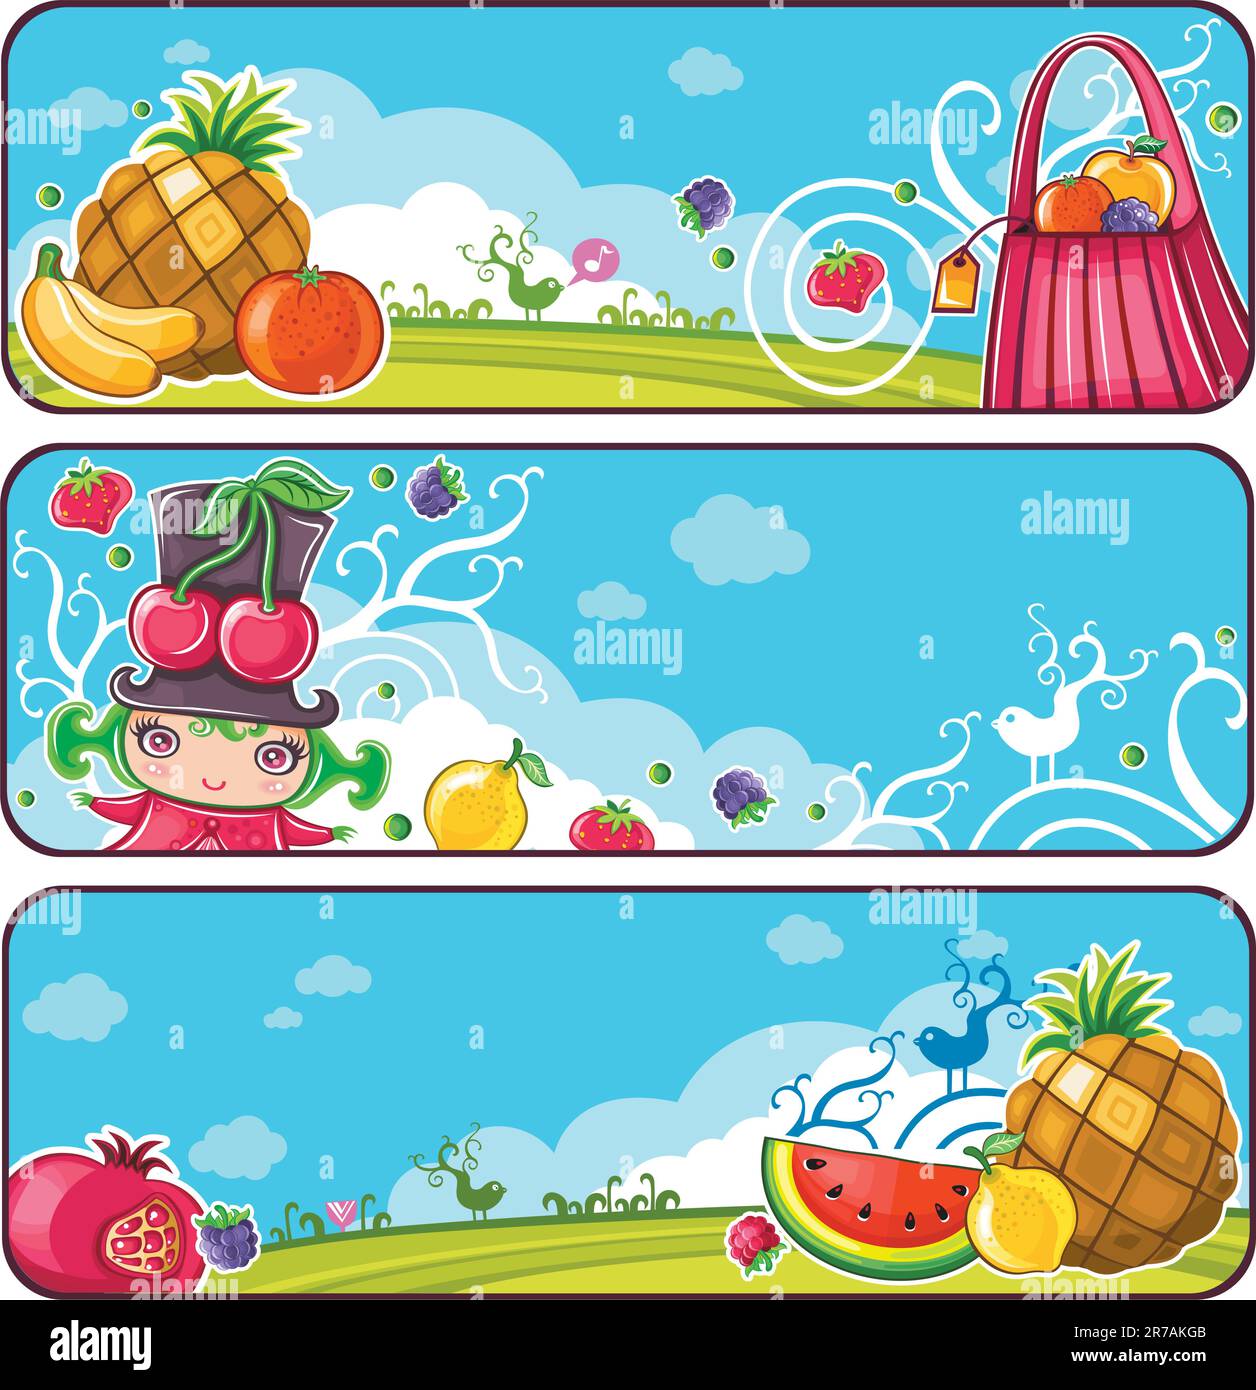 Set of of beautifully designed banners. Fruits and Berries Theme:  Colorful Summer background, blue sky, bird, fruits arrangements: Pineapple, bana... Stock Vector